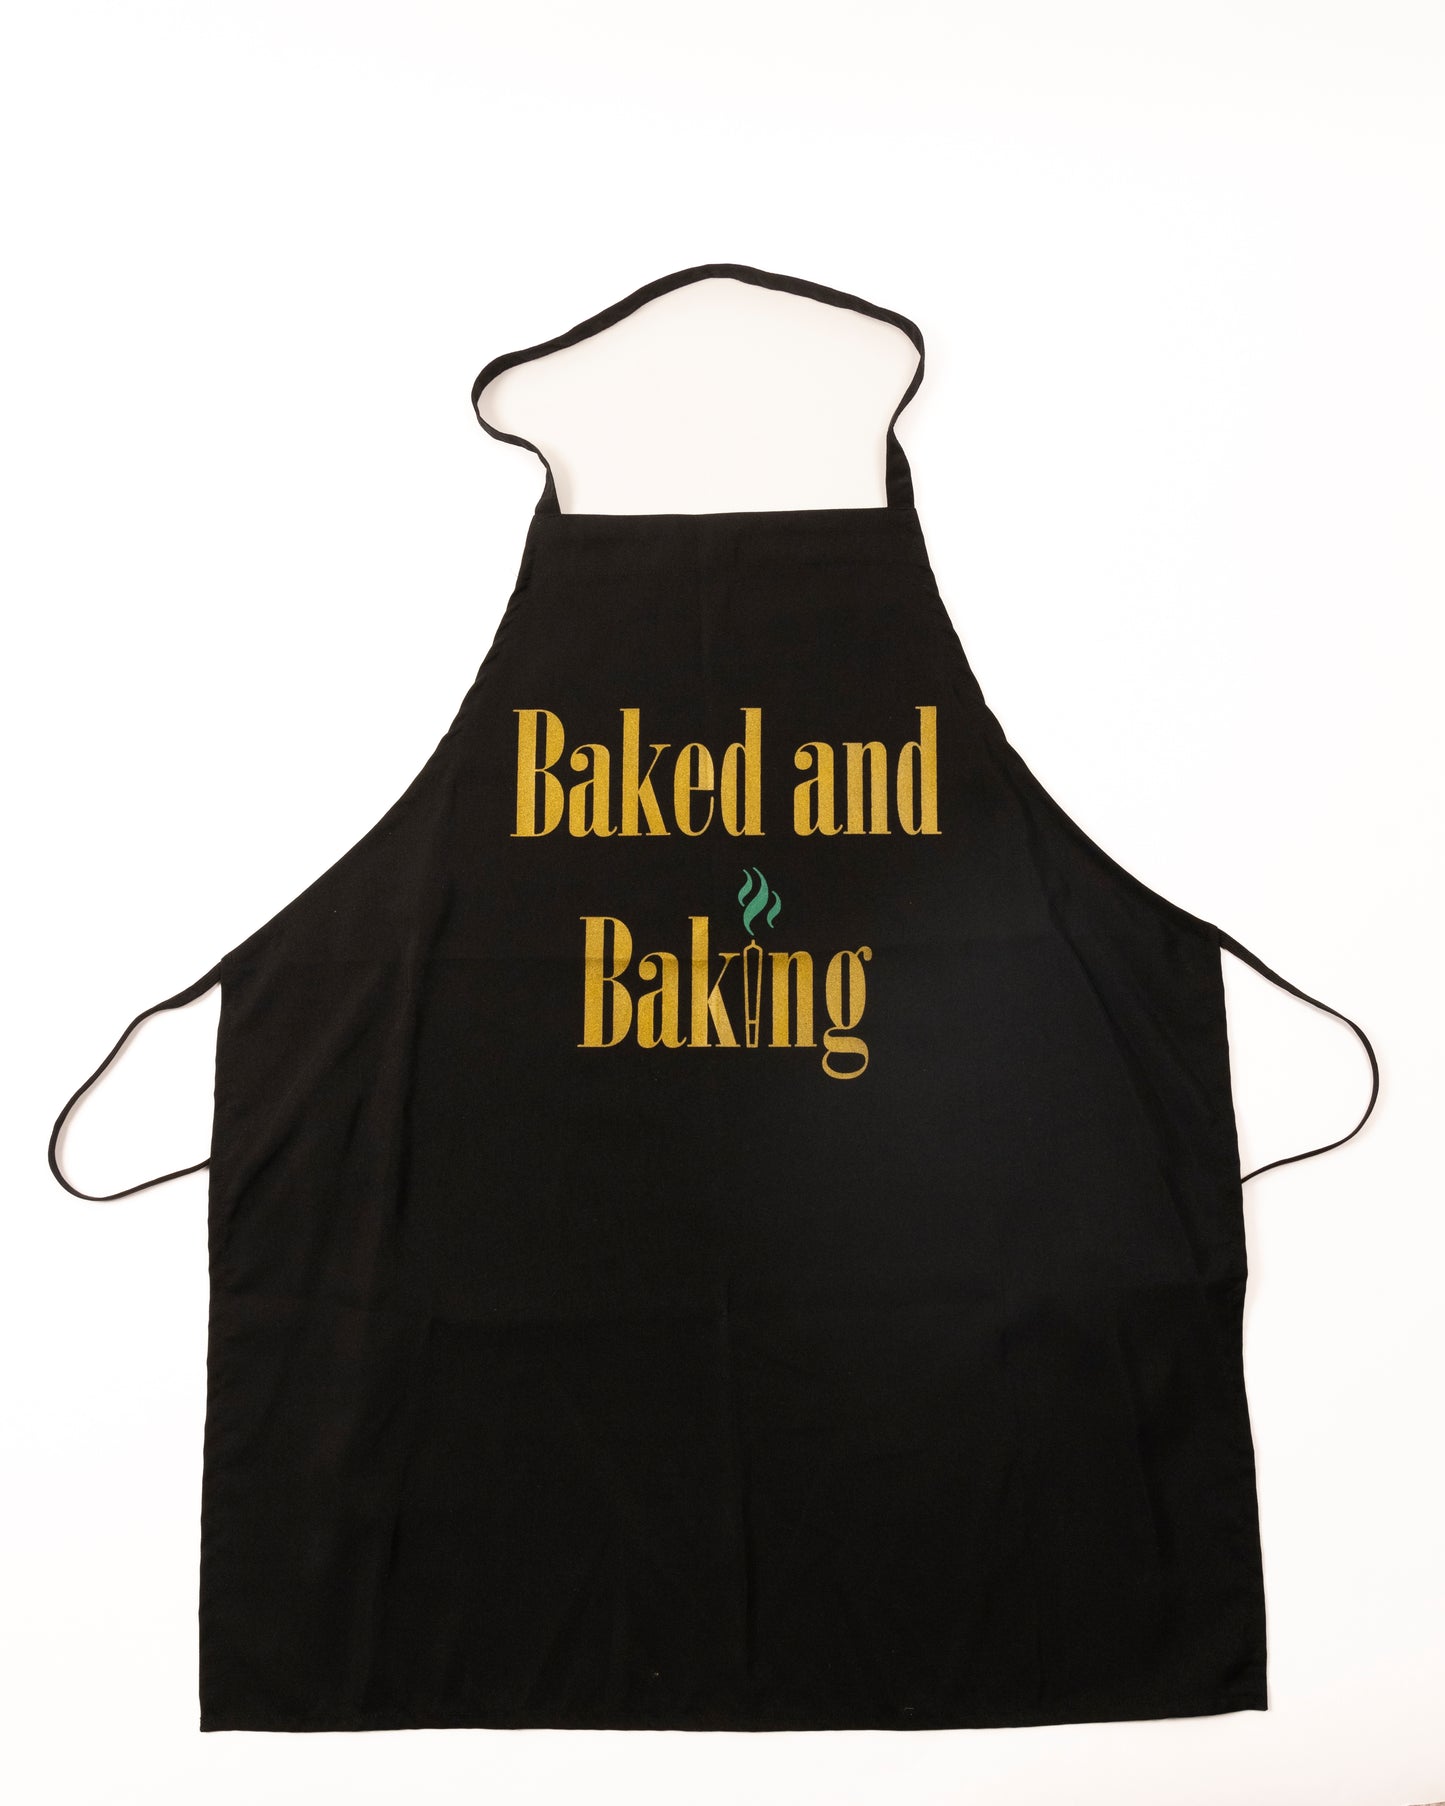 Baked and Baking Apron